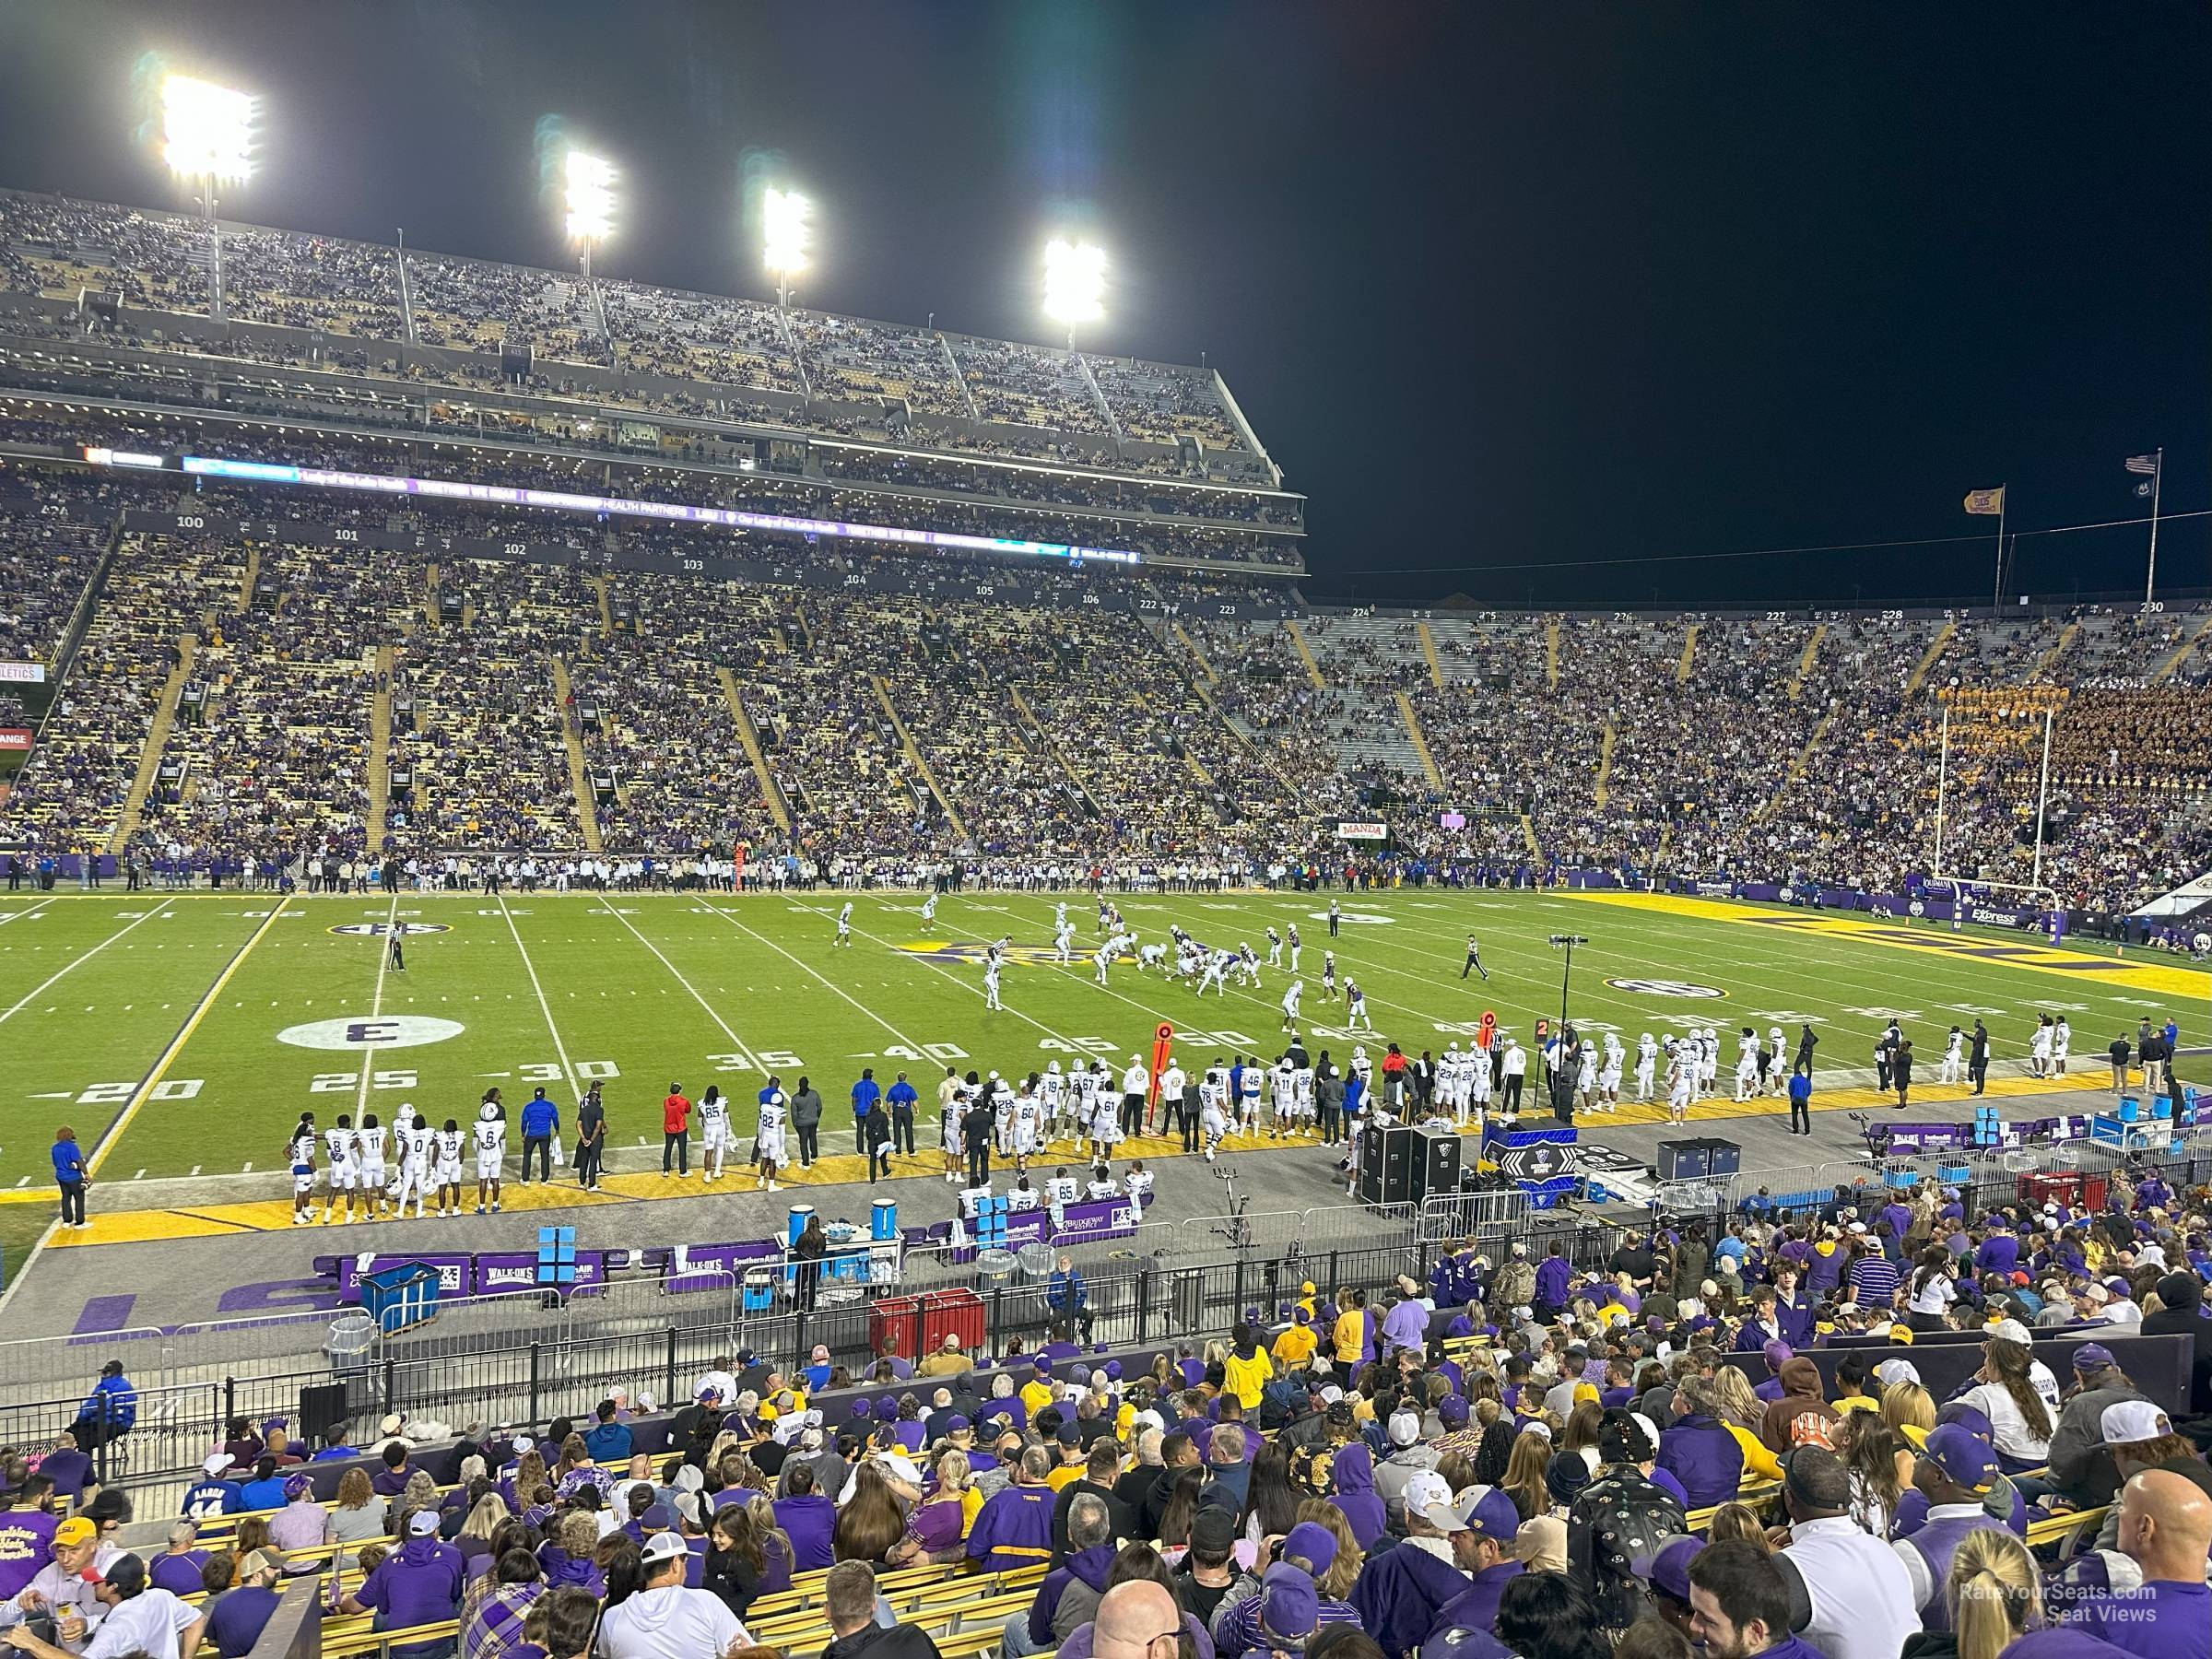 section 304, row 23 seat view  - tiger stadium